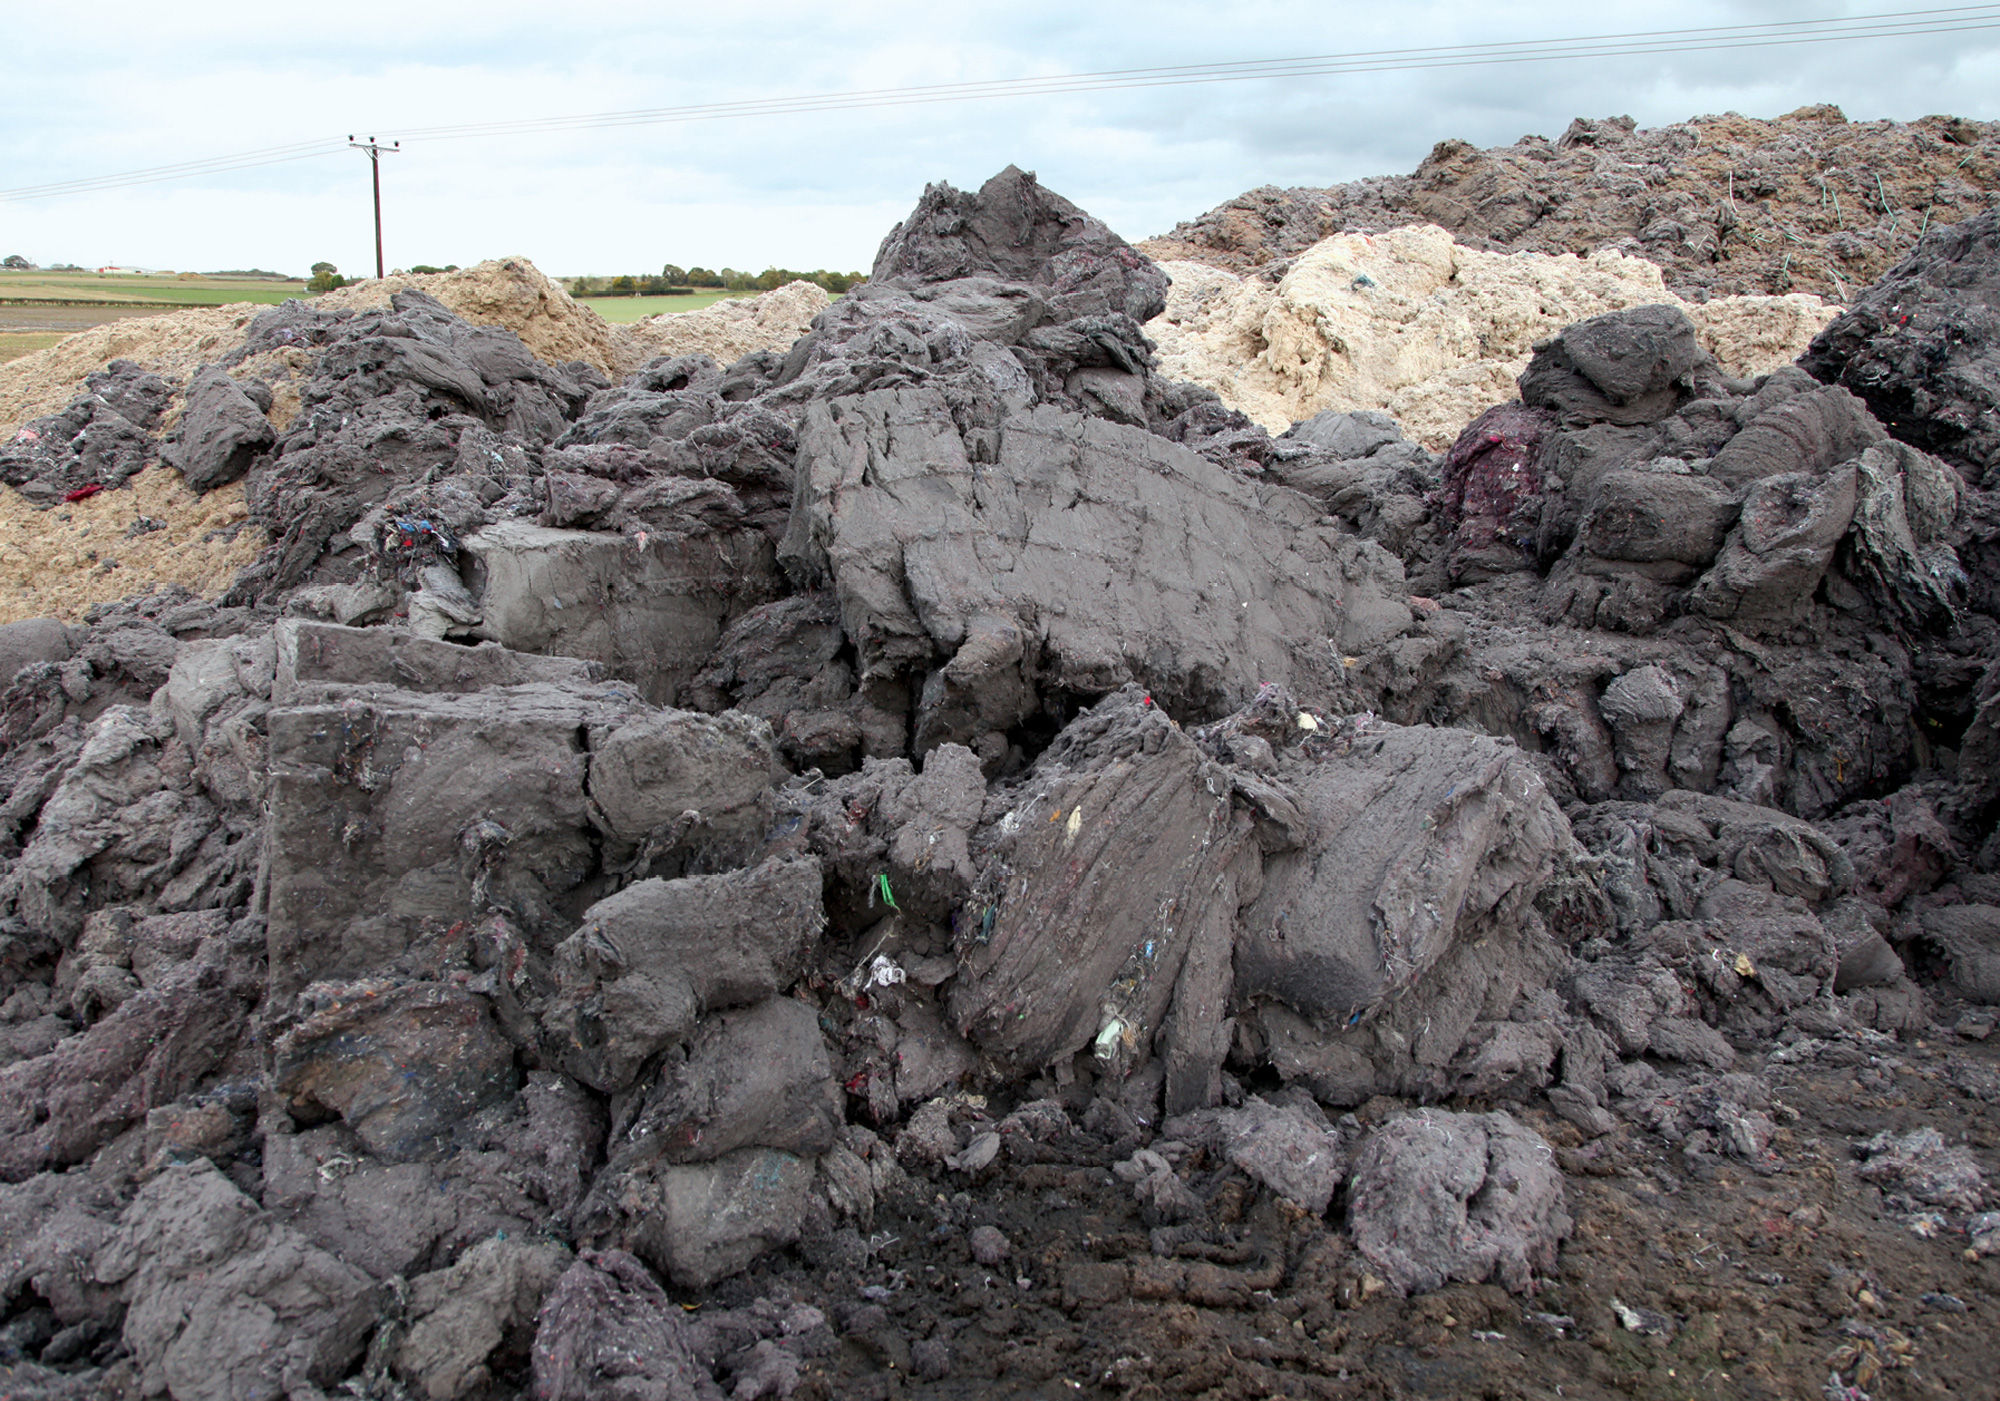 A photograph of several piles of dirty shoddy wool.